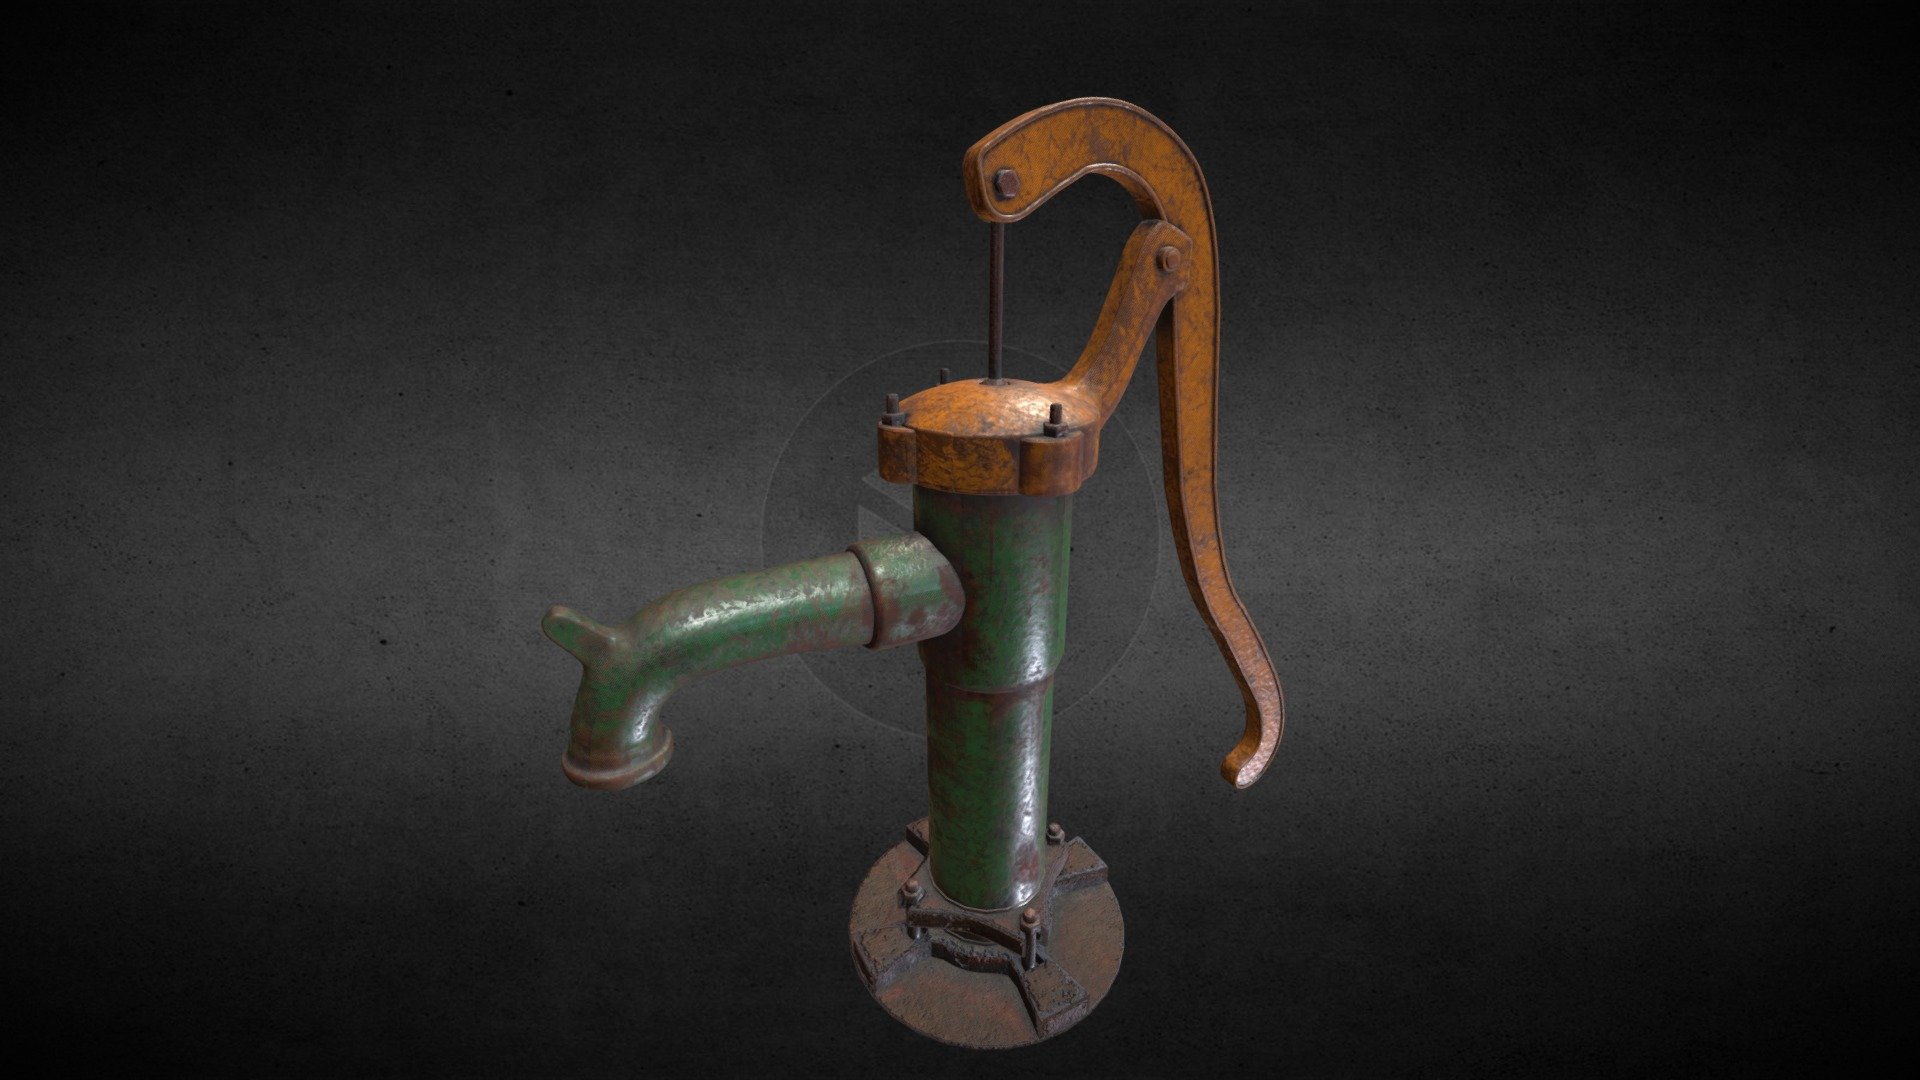 A hand operated water pump that you might see on a farm. Modeled in Cinema 4D and textured in Substance Painter - Rusty Old Water Pump - 3D model by jitterdoug 3d model